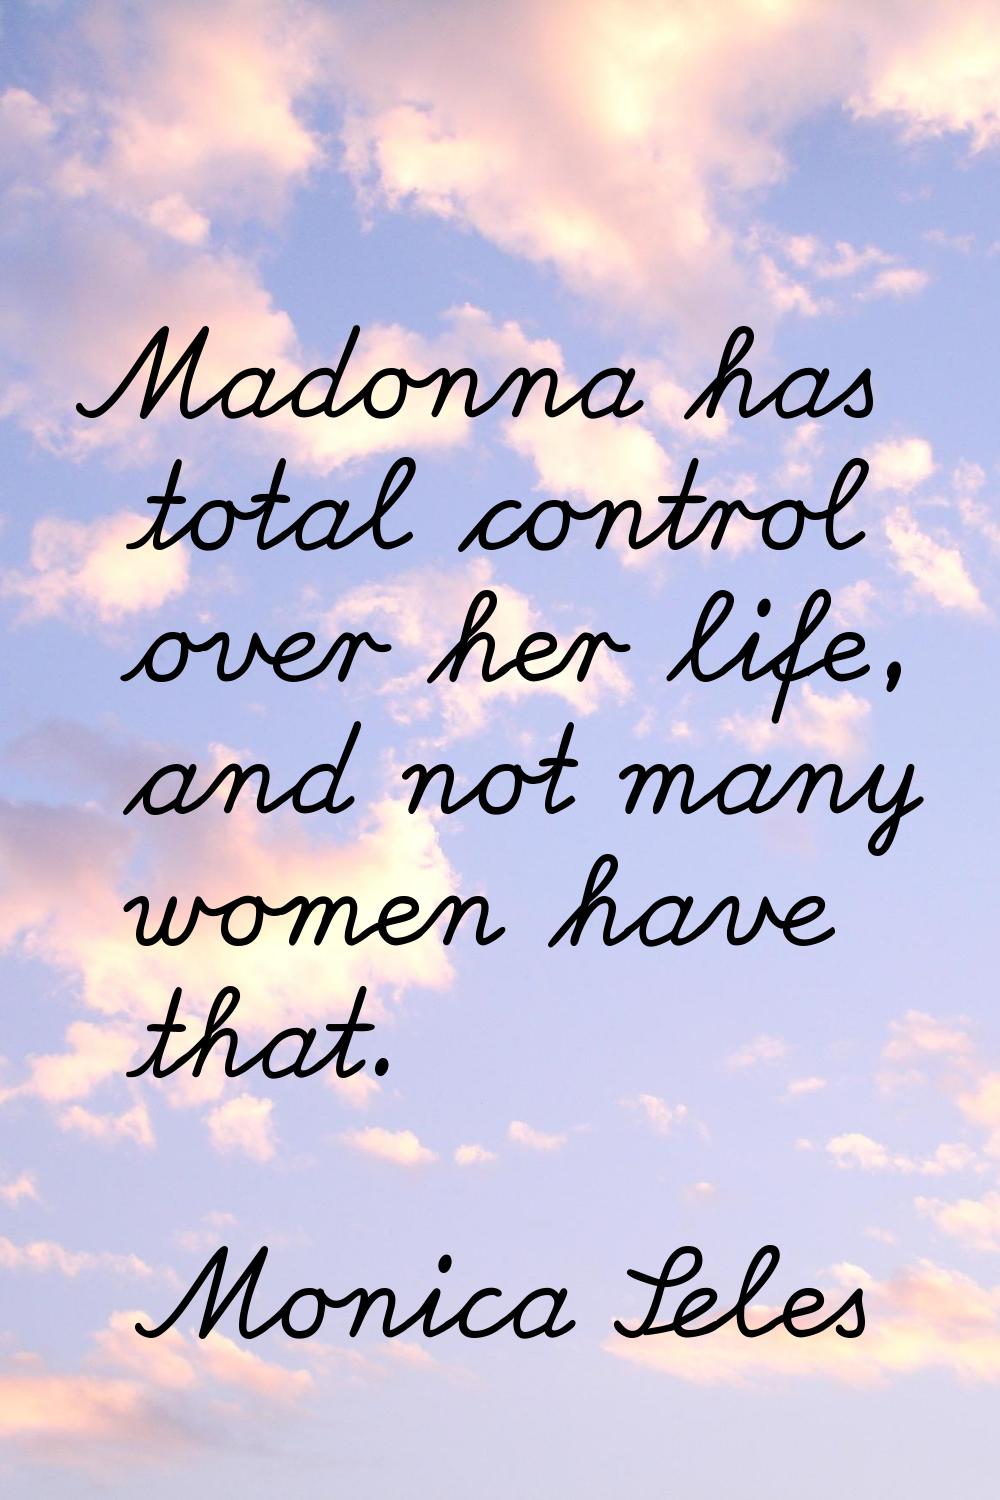 Madonna has total control over her life, and not many women have that.